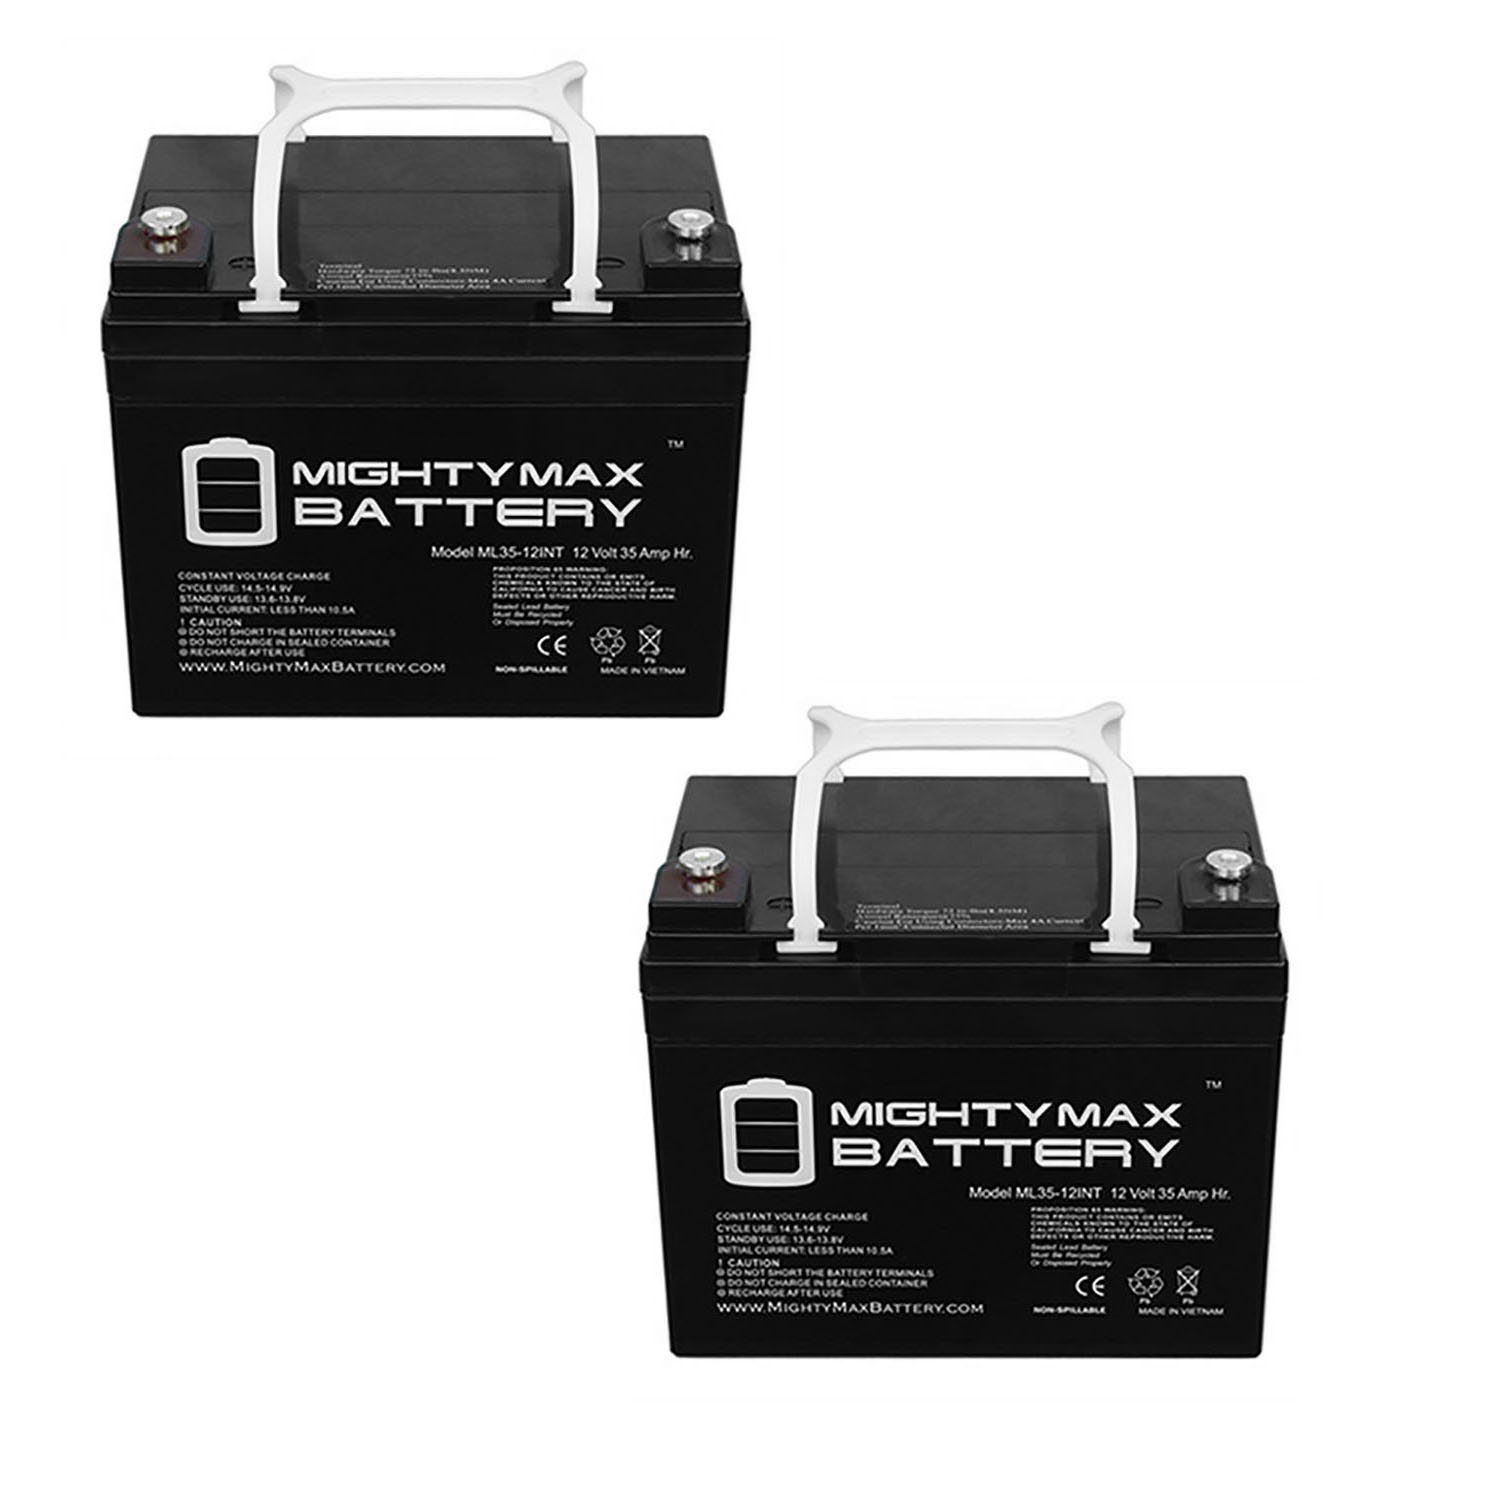 12V 35AH INT Replacement Battery for Advantage Battery U1 - 2 Pack